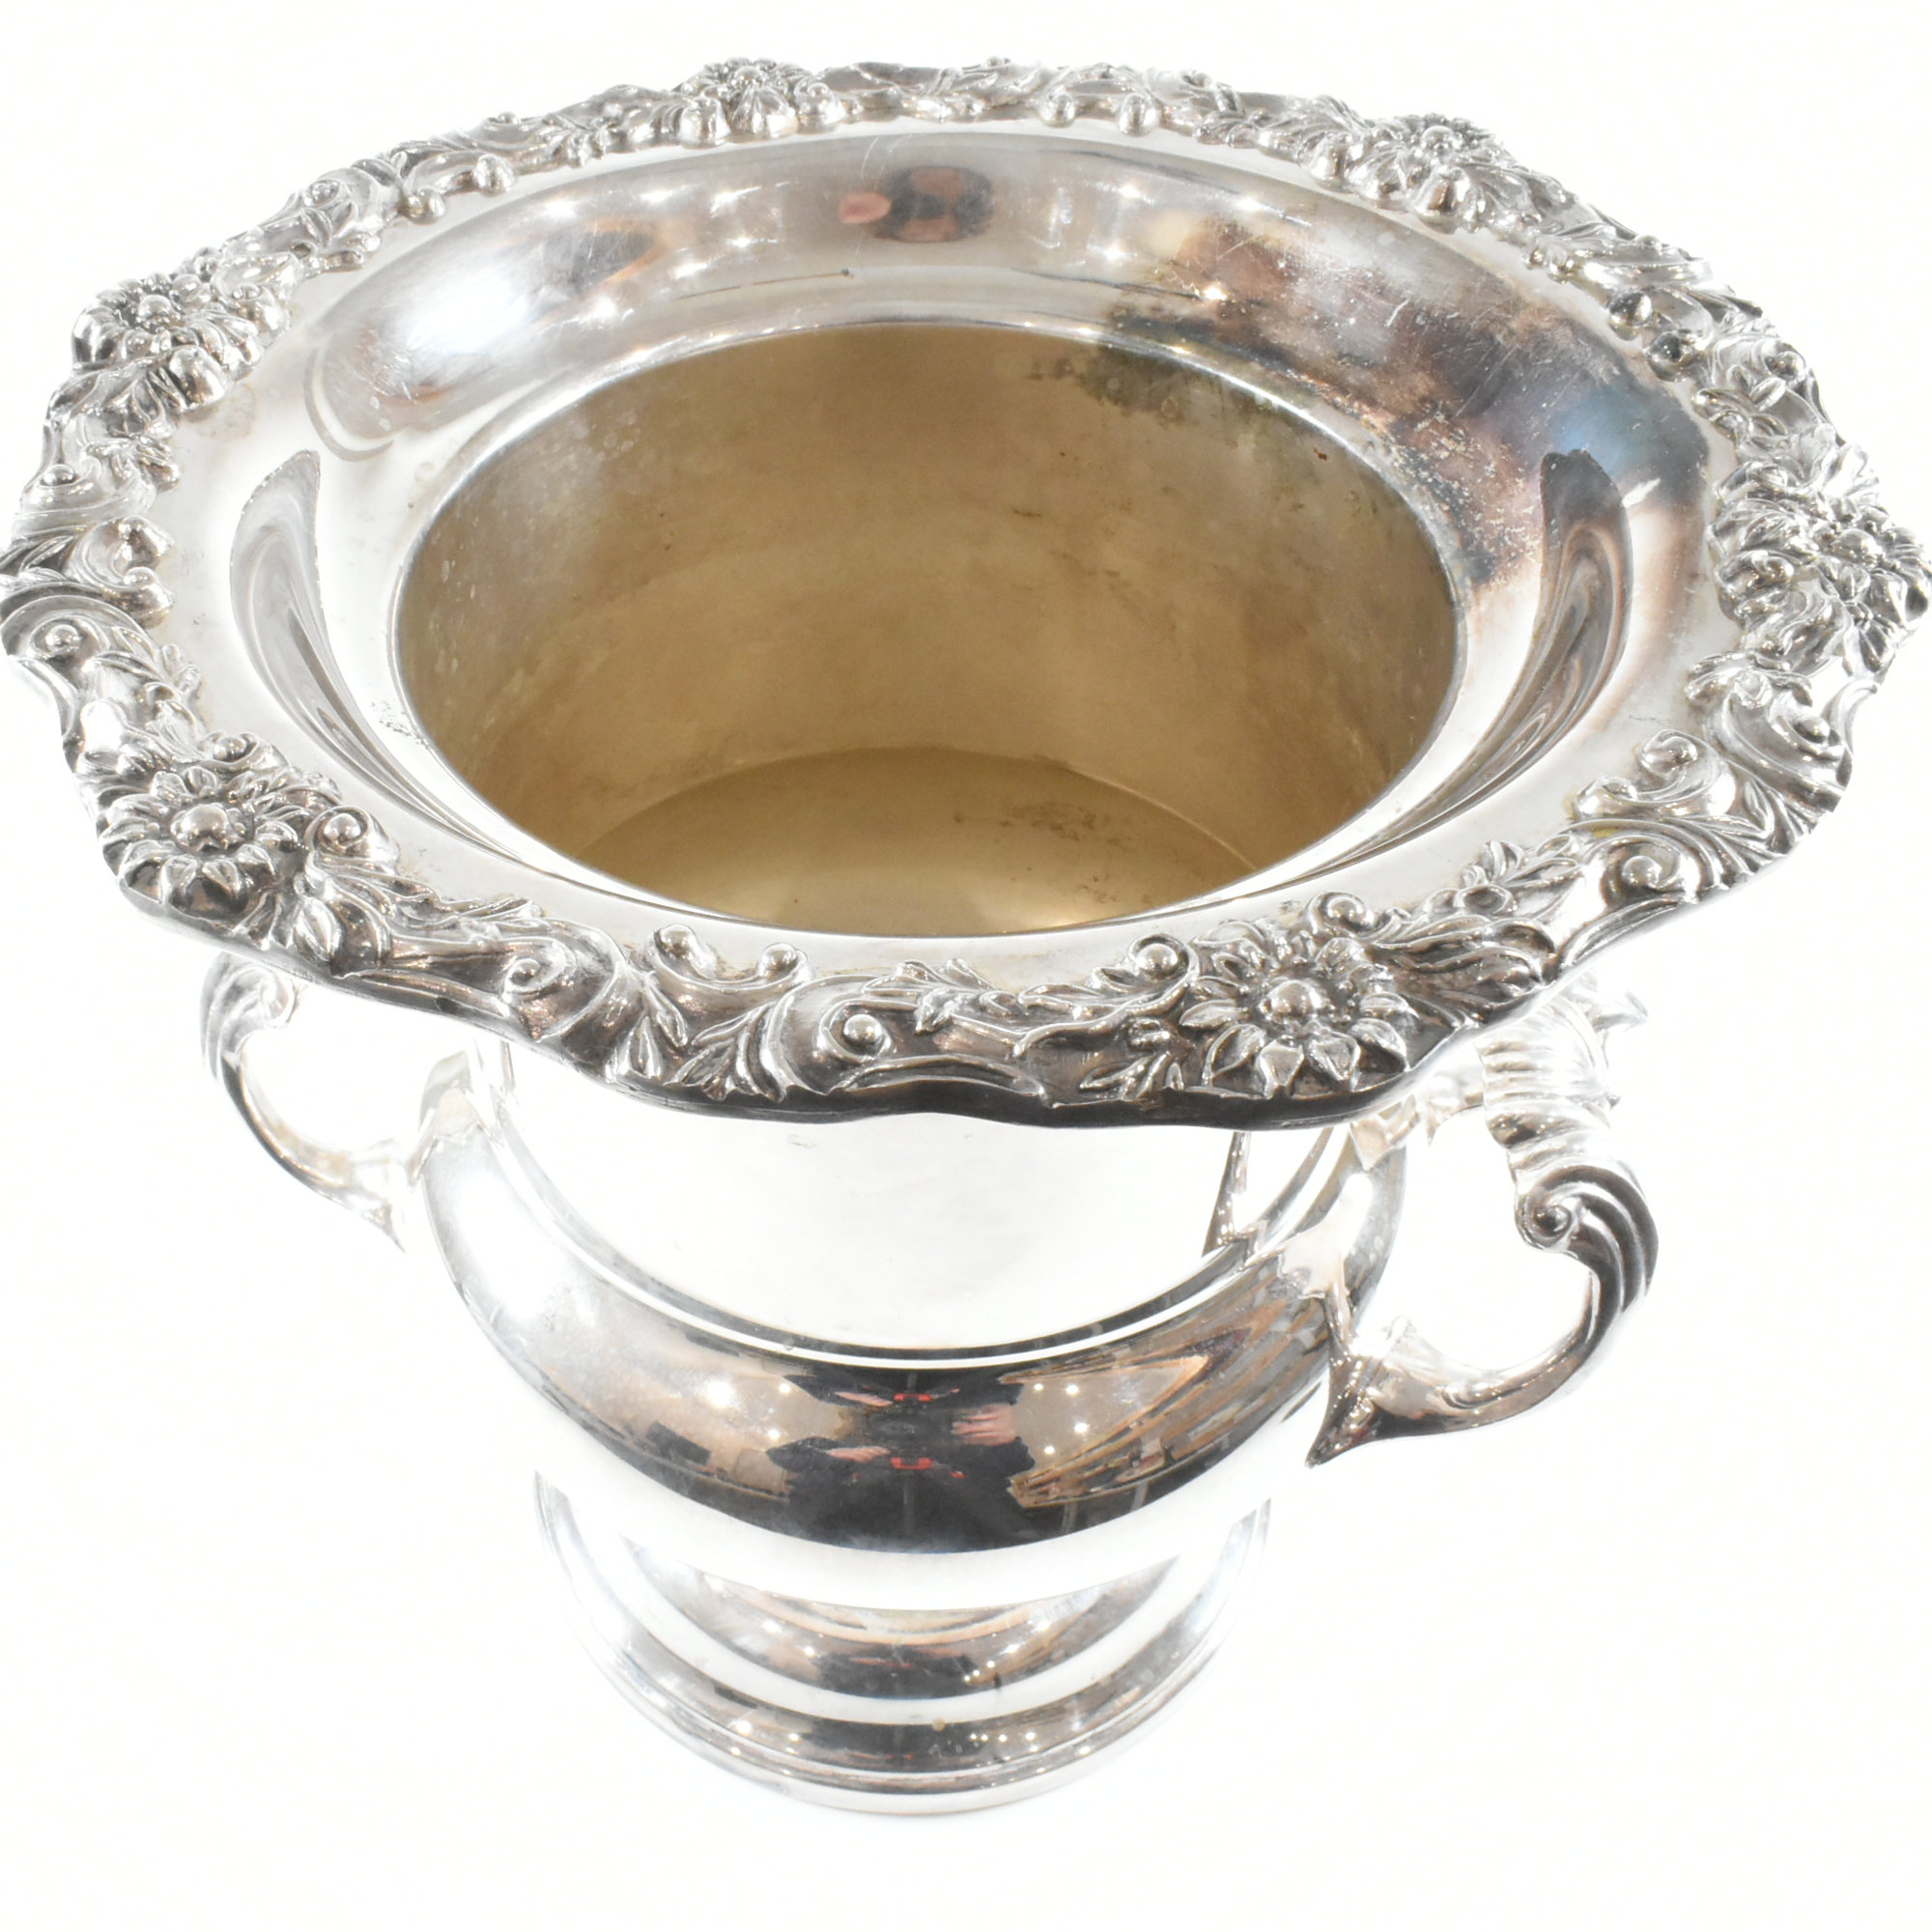 SILVER PLATED VINTAGE AMERICAN CHAMPAGNE ICE BUCKET - Image 13 of 13